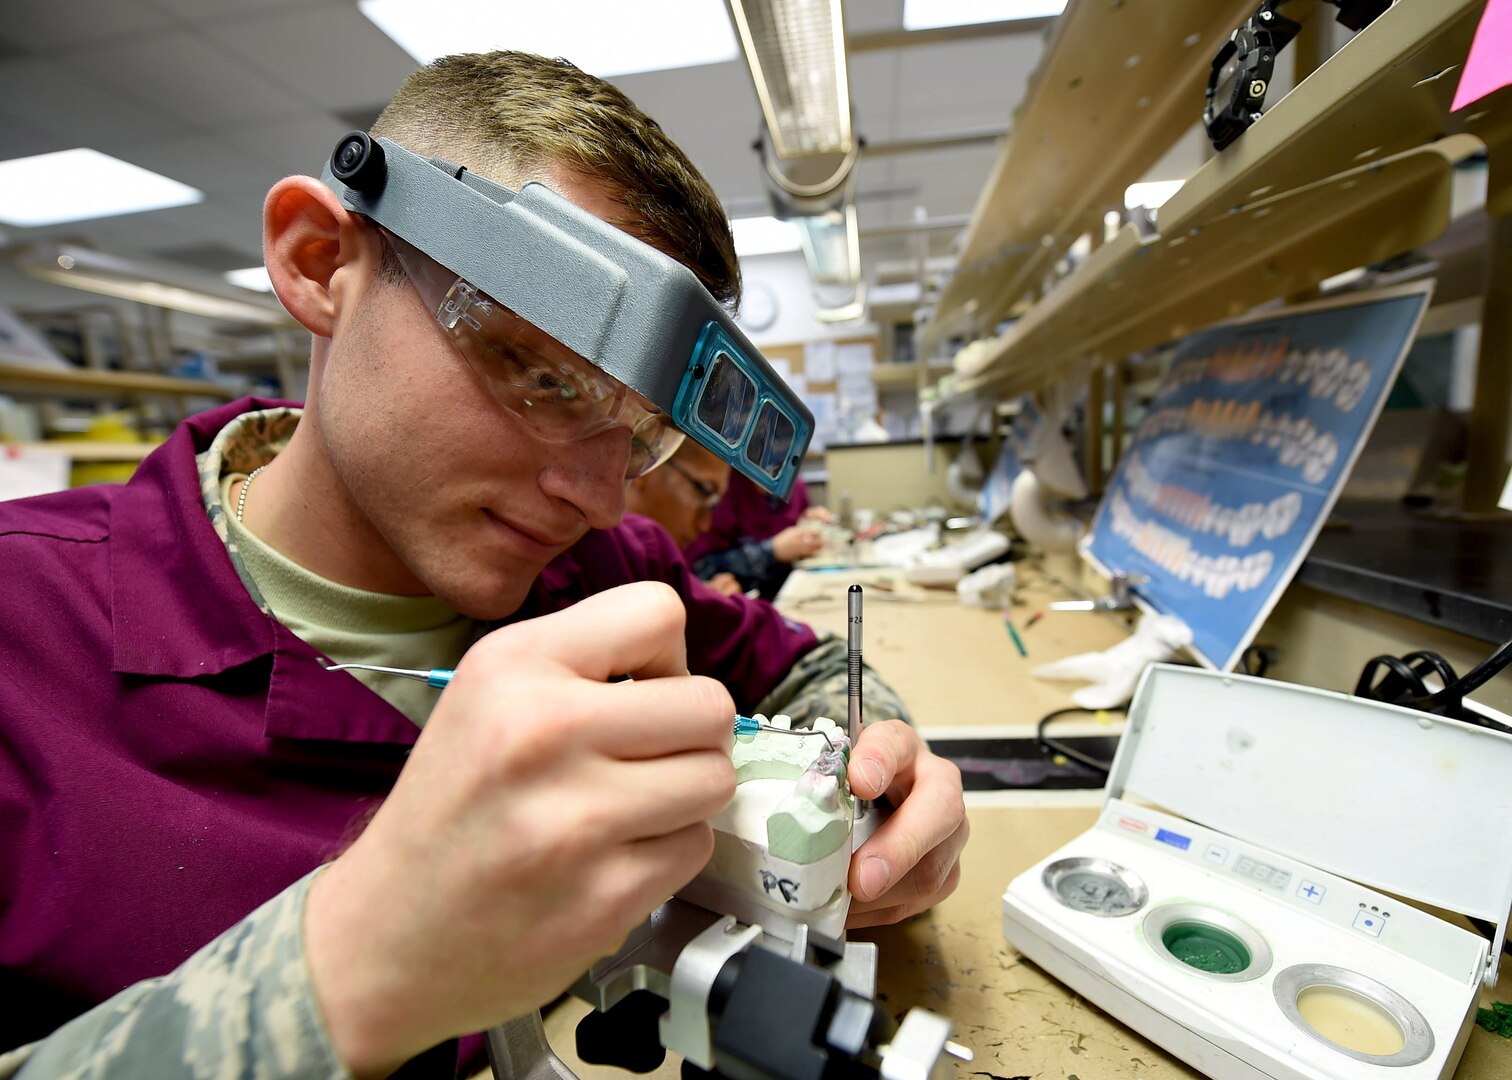 Airman Logan Encinas, a dental laboratory apprentice course trainee, practices fabricating a metal restoration at the Medical Education and Training Campus on Joint Base San Antonio-Fort Sam Houston, Oct. 20, 2016. During the 6-month course, trainees will learn and practice the concepts and skills necessary to become a fully-qualified dental laboratory technician. (U.S. Air Force photo/Staff Sgt. Jerilyn Quintanilla)